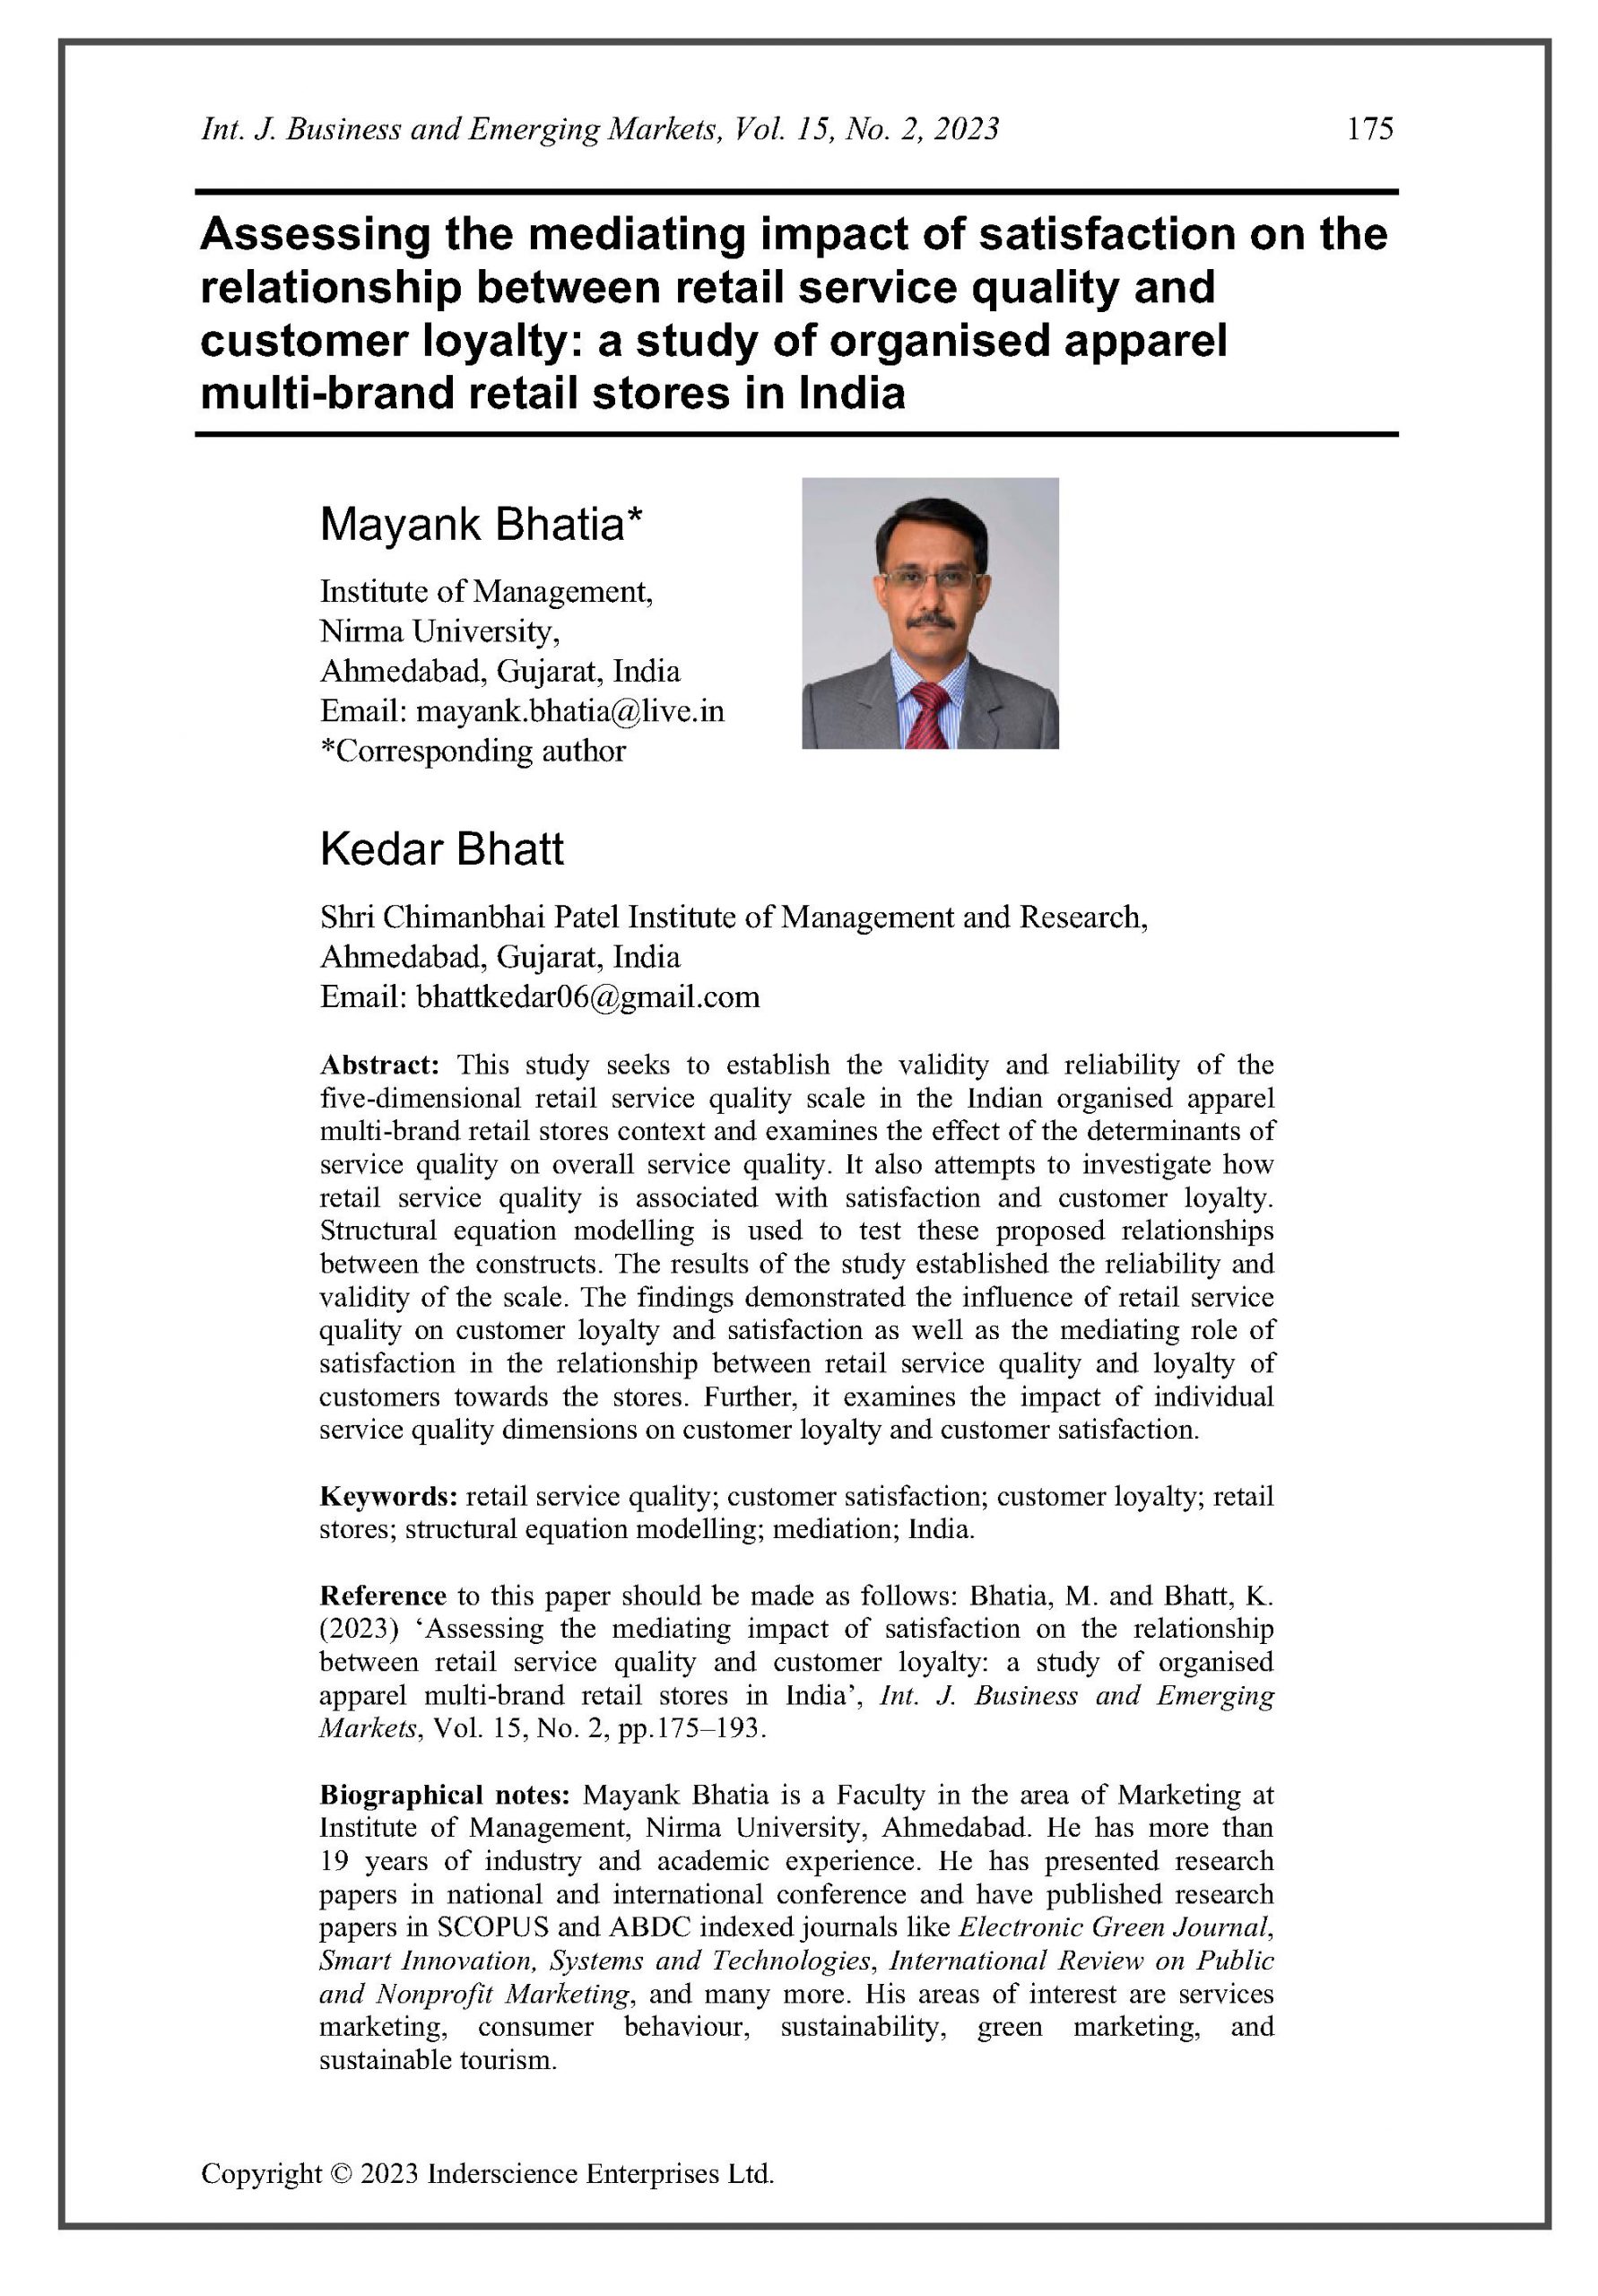 Assessing the Mediating Impact of Satisfaction on the Relationship Between Retail Service Quality and Customer Loyalty: A Study of Organized Apparel Multi-Brand Retail Stores in India